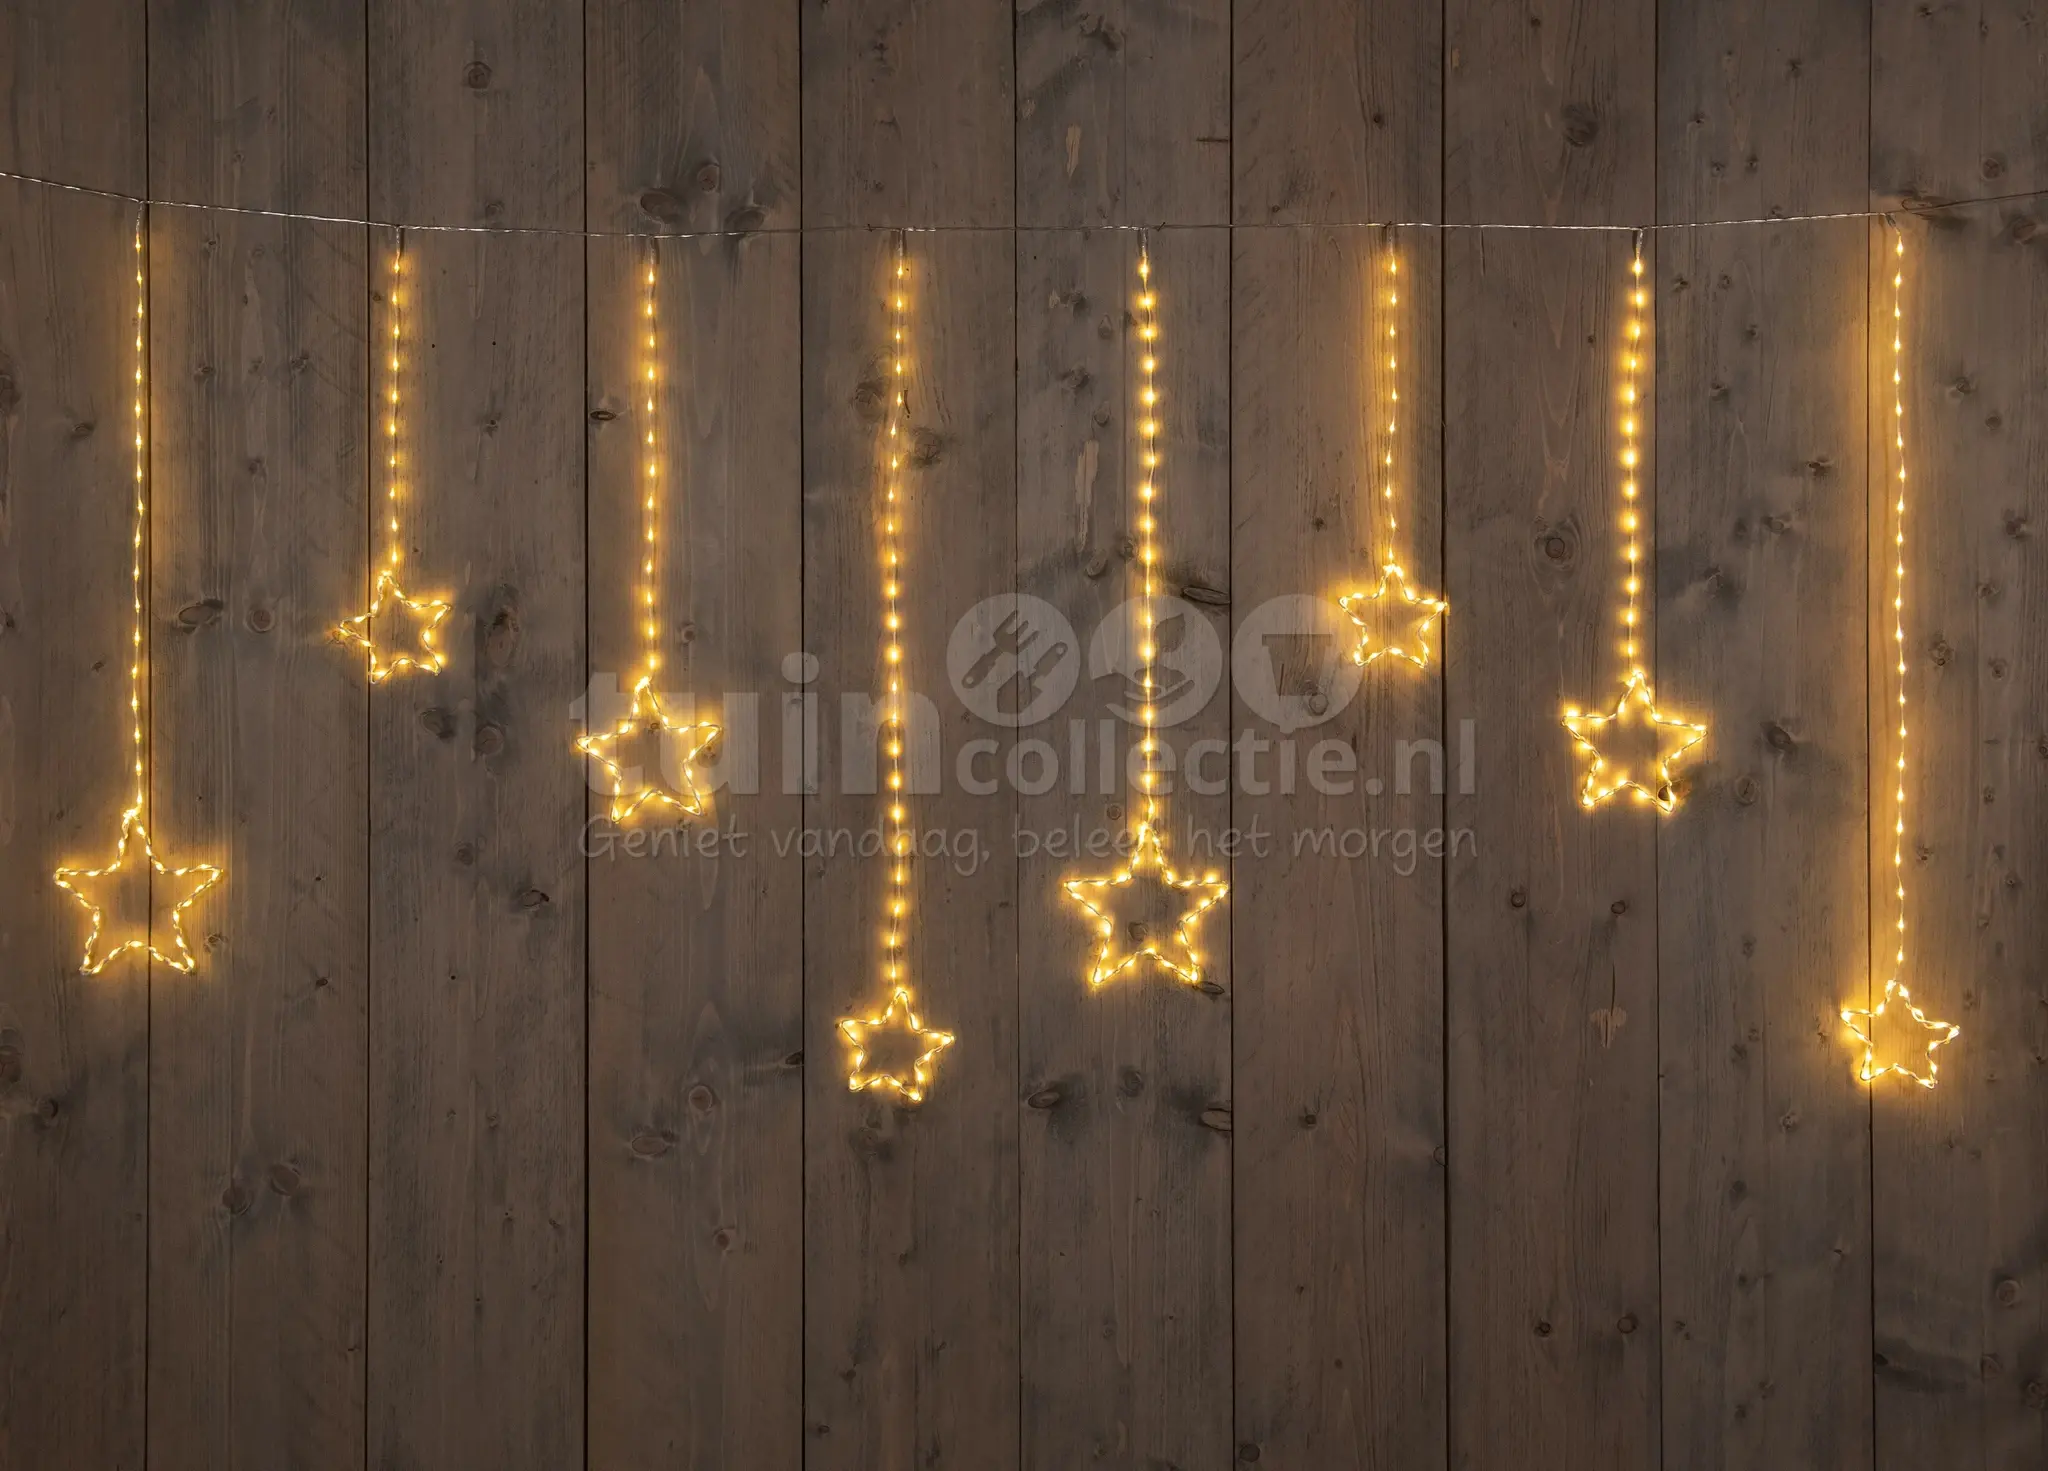 Ster Kerstverlichting | | 364 LED - Tuincollectie.nl